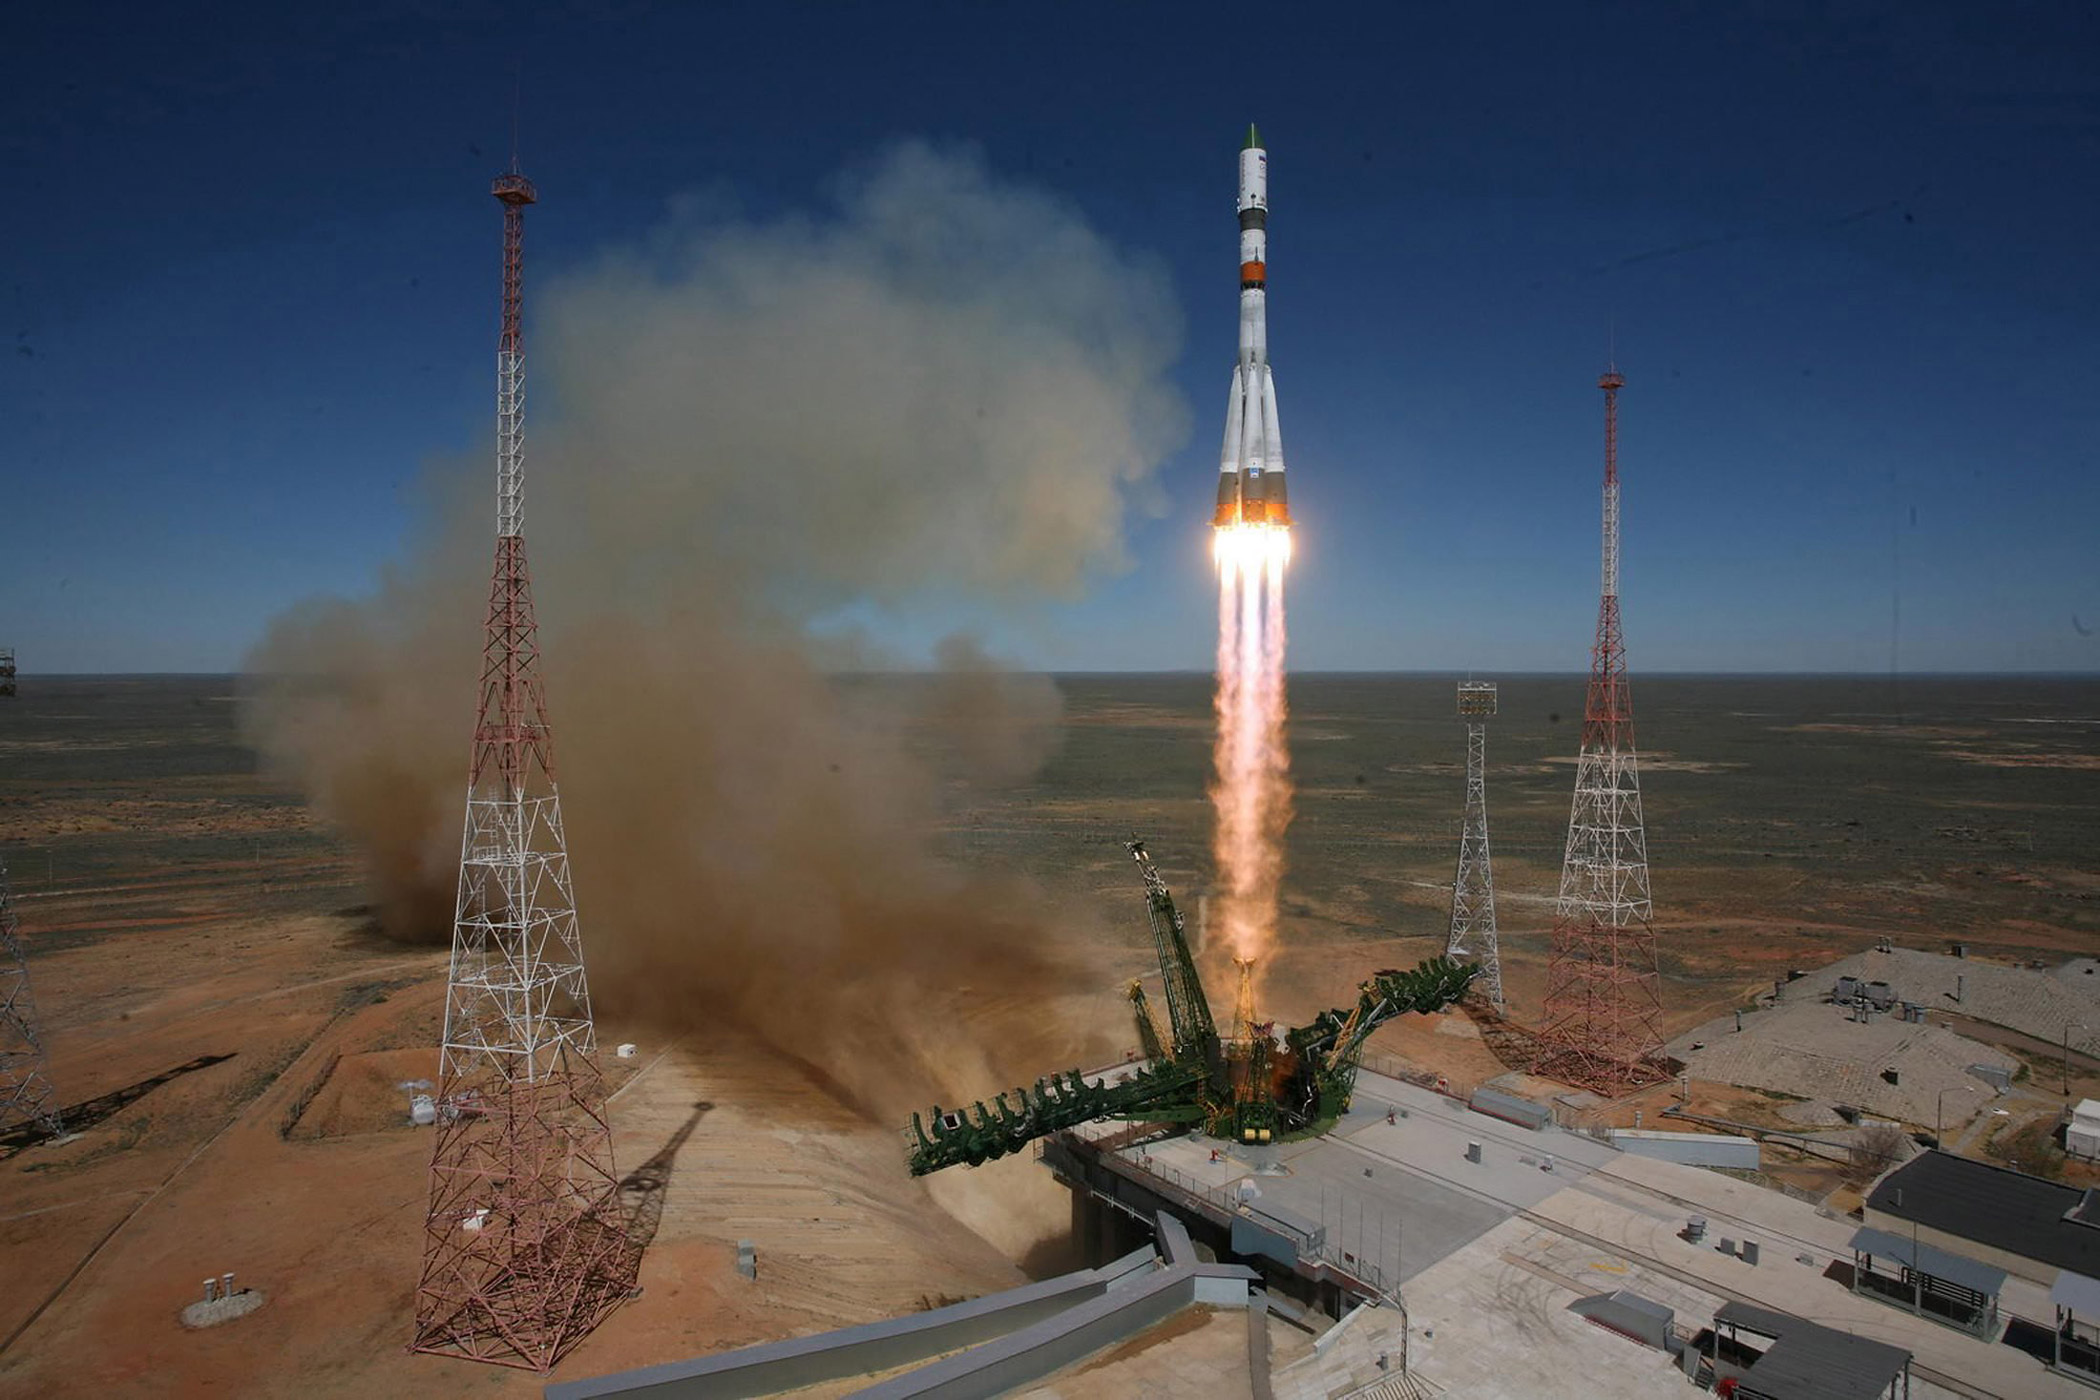 The Progress M-27M cargo ship  launched from Baikonur cosmodrome